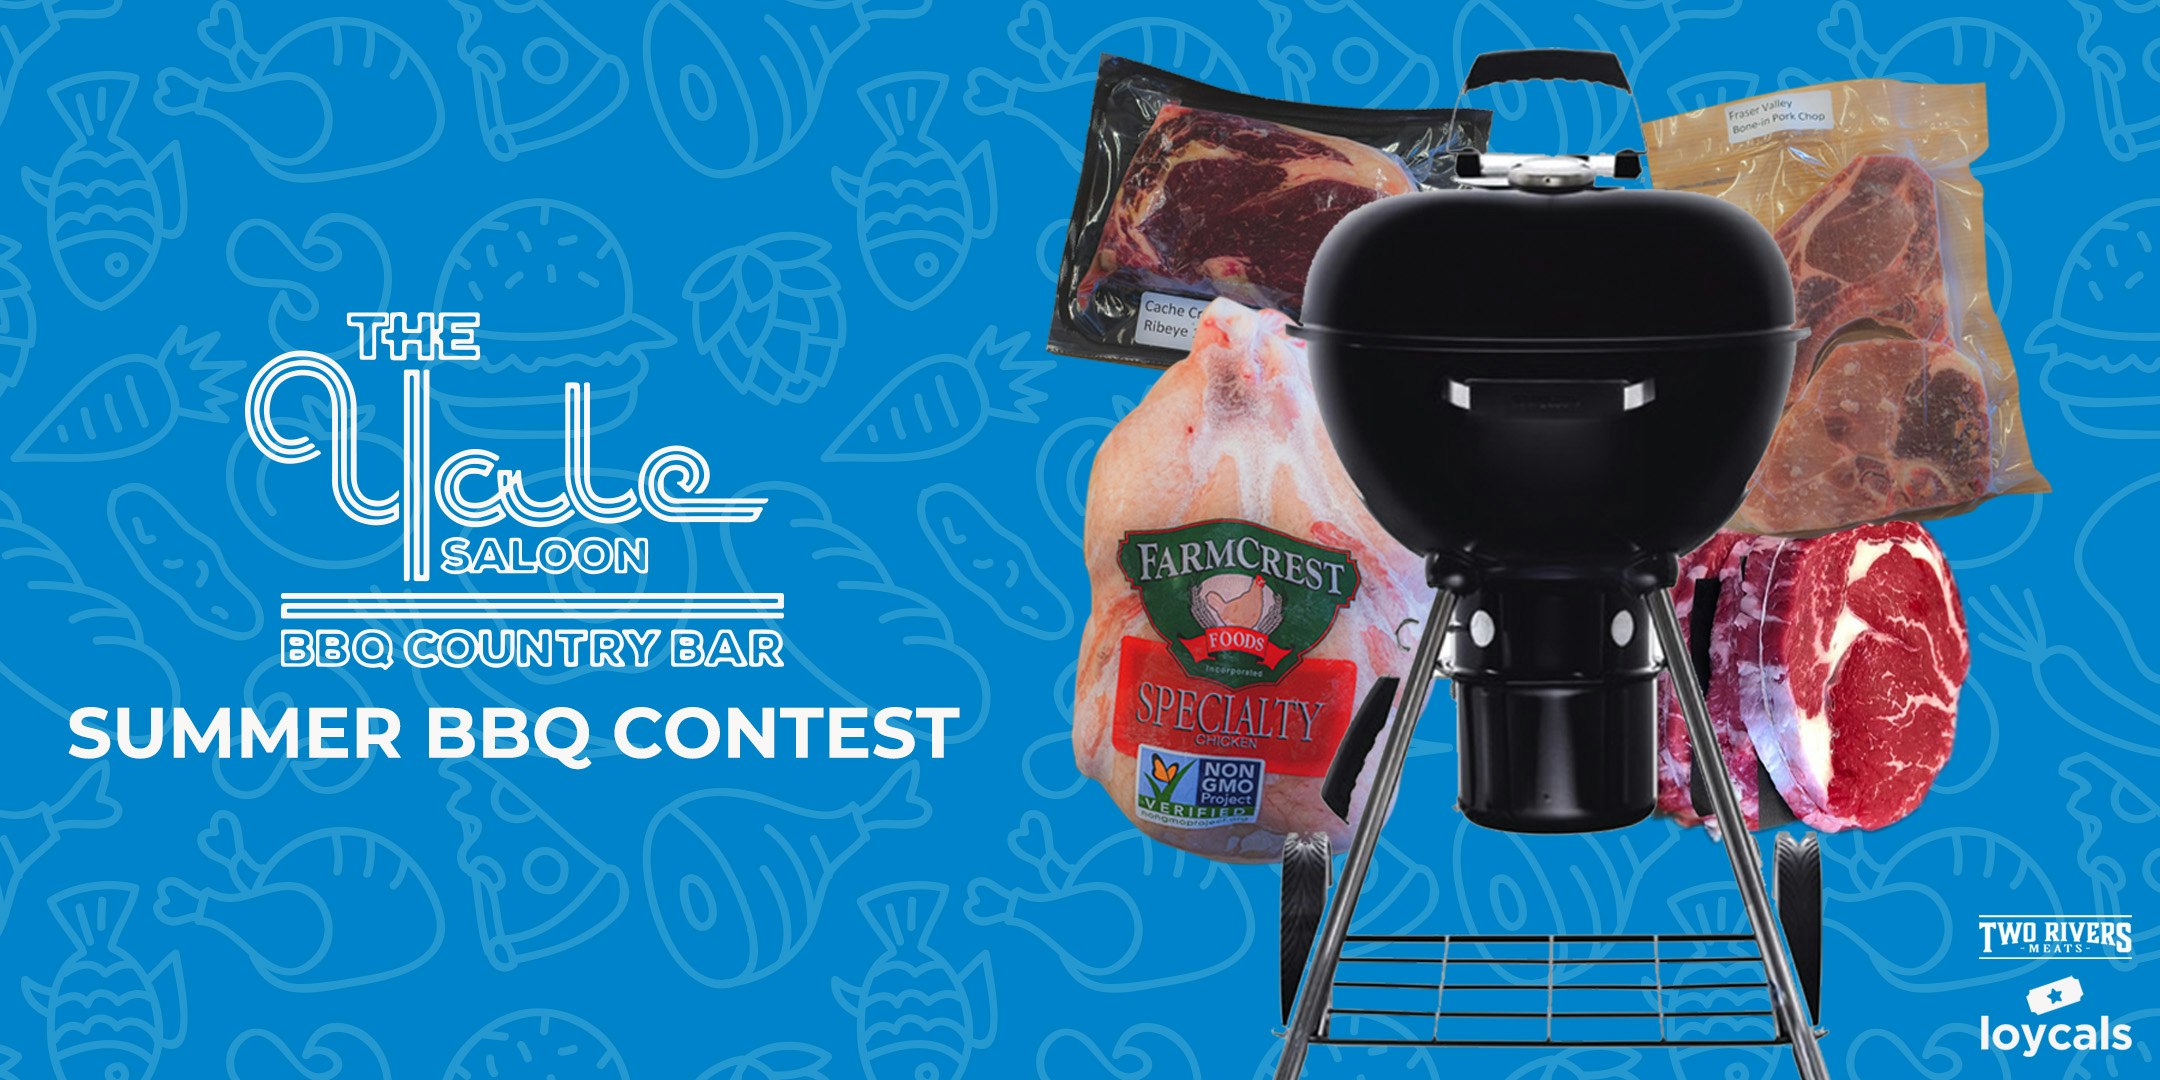 online contests, sweepstakes and giveaways - Win the ultimate Summer BBQ Prize Pack from Yale Saloon!